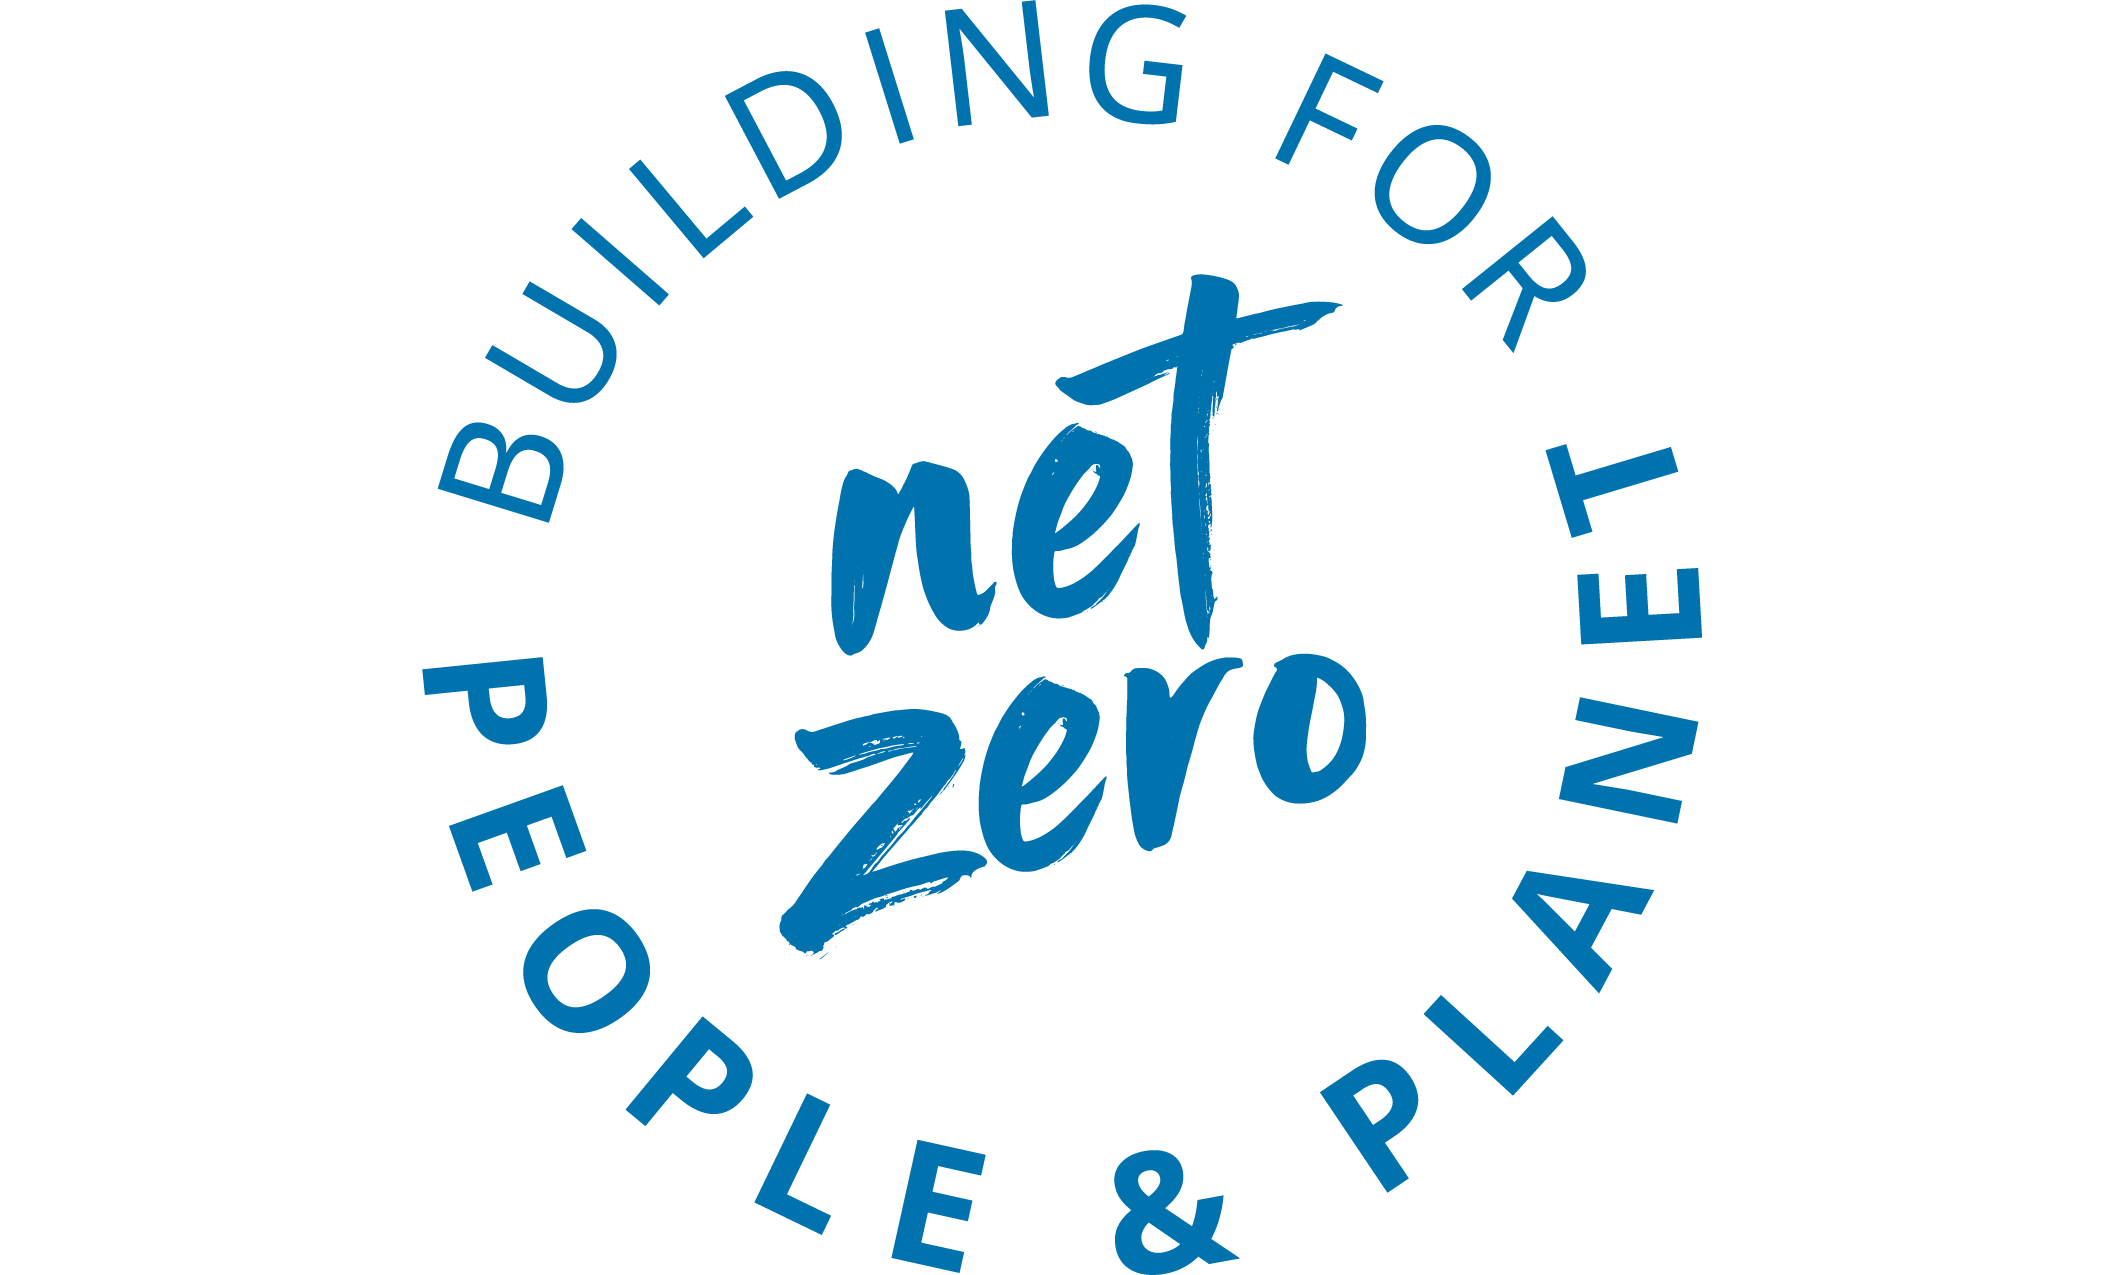 a world first for construction as Aggregate Industries’ parent company Lafargeholcim commits to net zero pledge